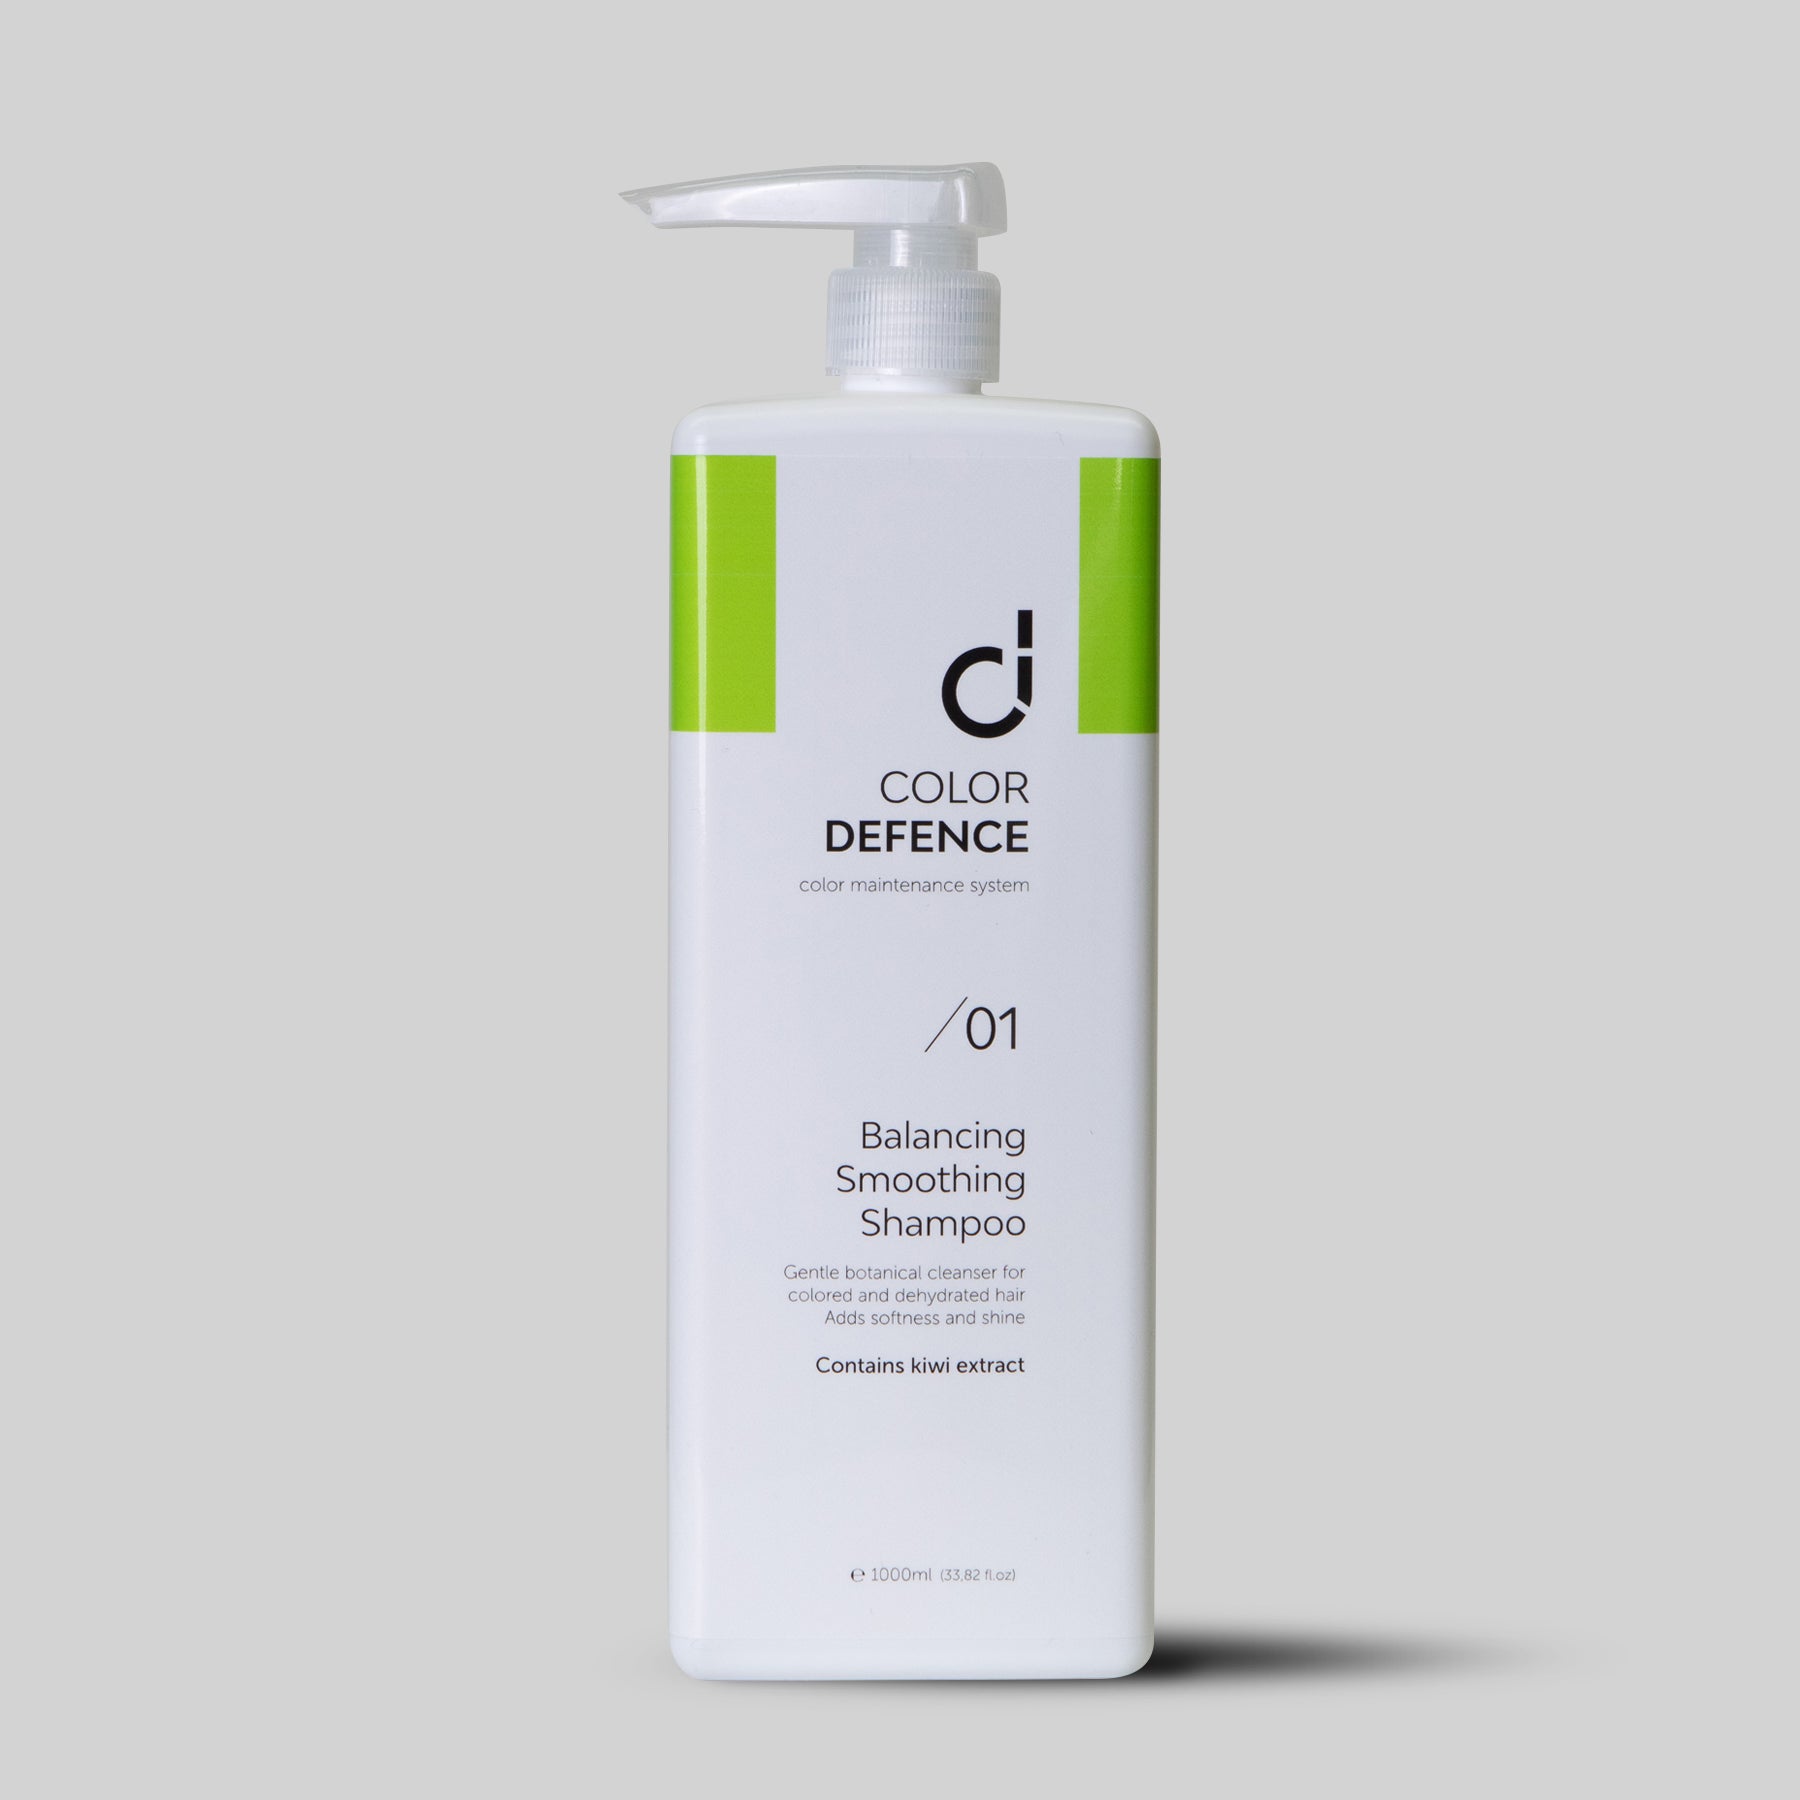 Balancing Smoothing Shampoo - Cleanses and prepares hair for our 3 step colour maintenance system. A gentle daily shampoo for dehydrated, coloured hair. Reduces oxidation, protects against free radical and environmental damage. A gentle botanical cleanser that adds body and shine. Contains Vitamin E & Kiwi extract.1234